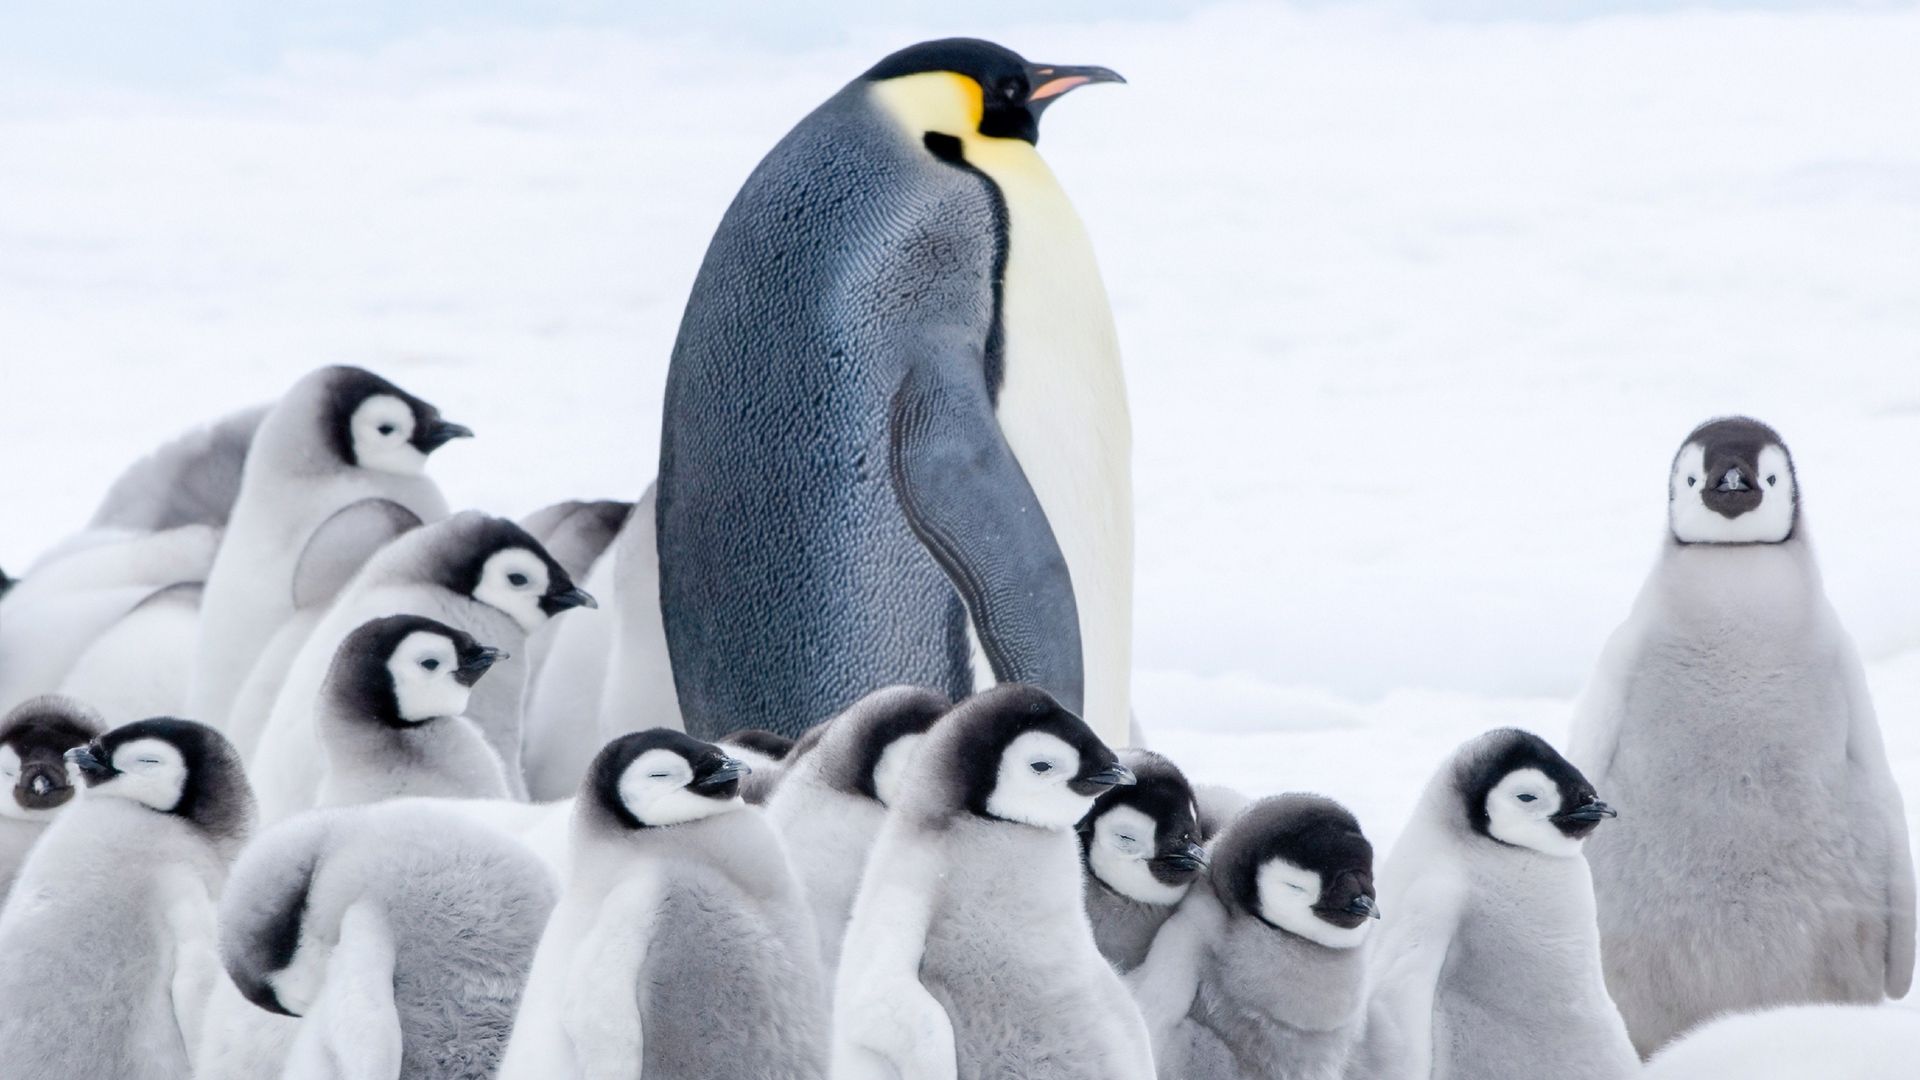 March of the Penguins 2: The Next Step Backdrop